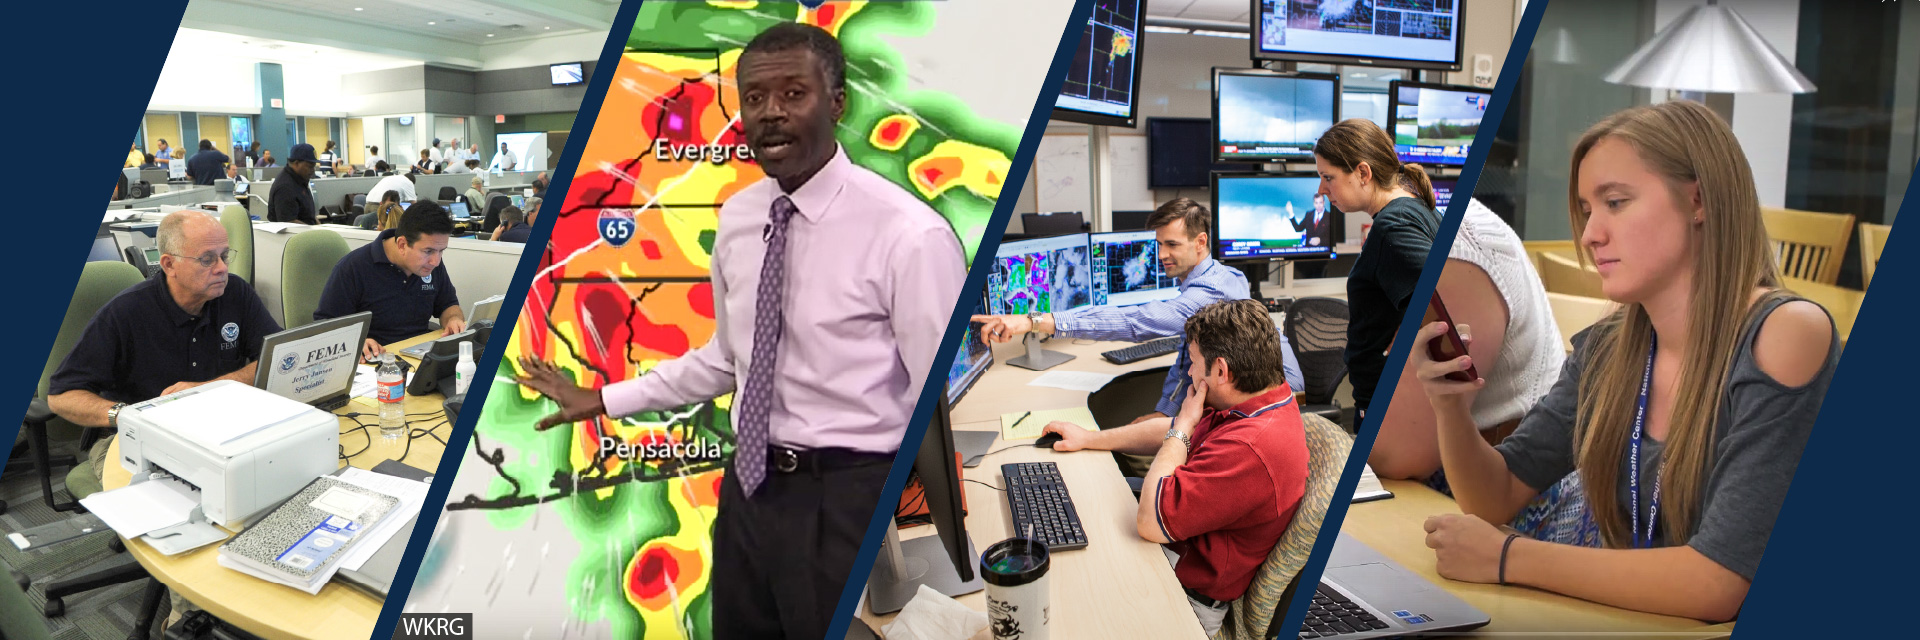 Images of emergency management workers, TV forecaster, NWS researchers, person looking at a mobile phone